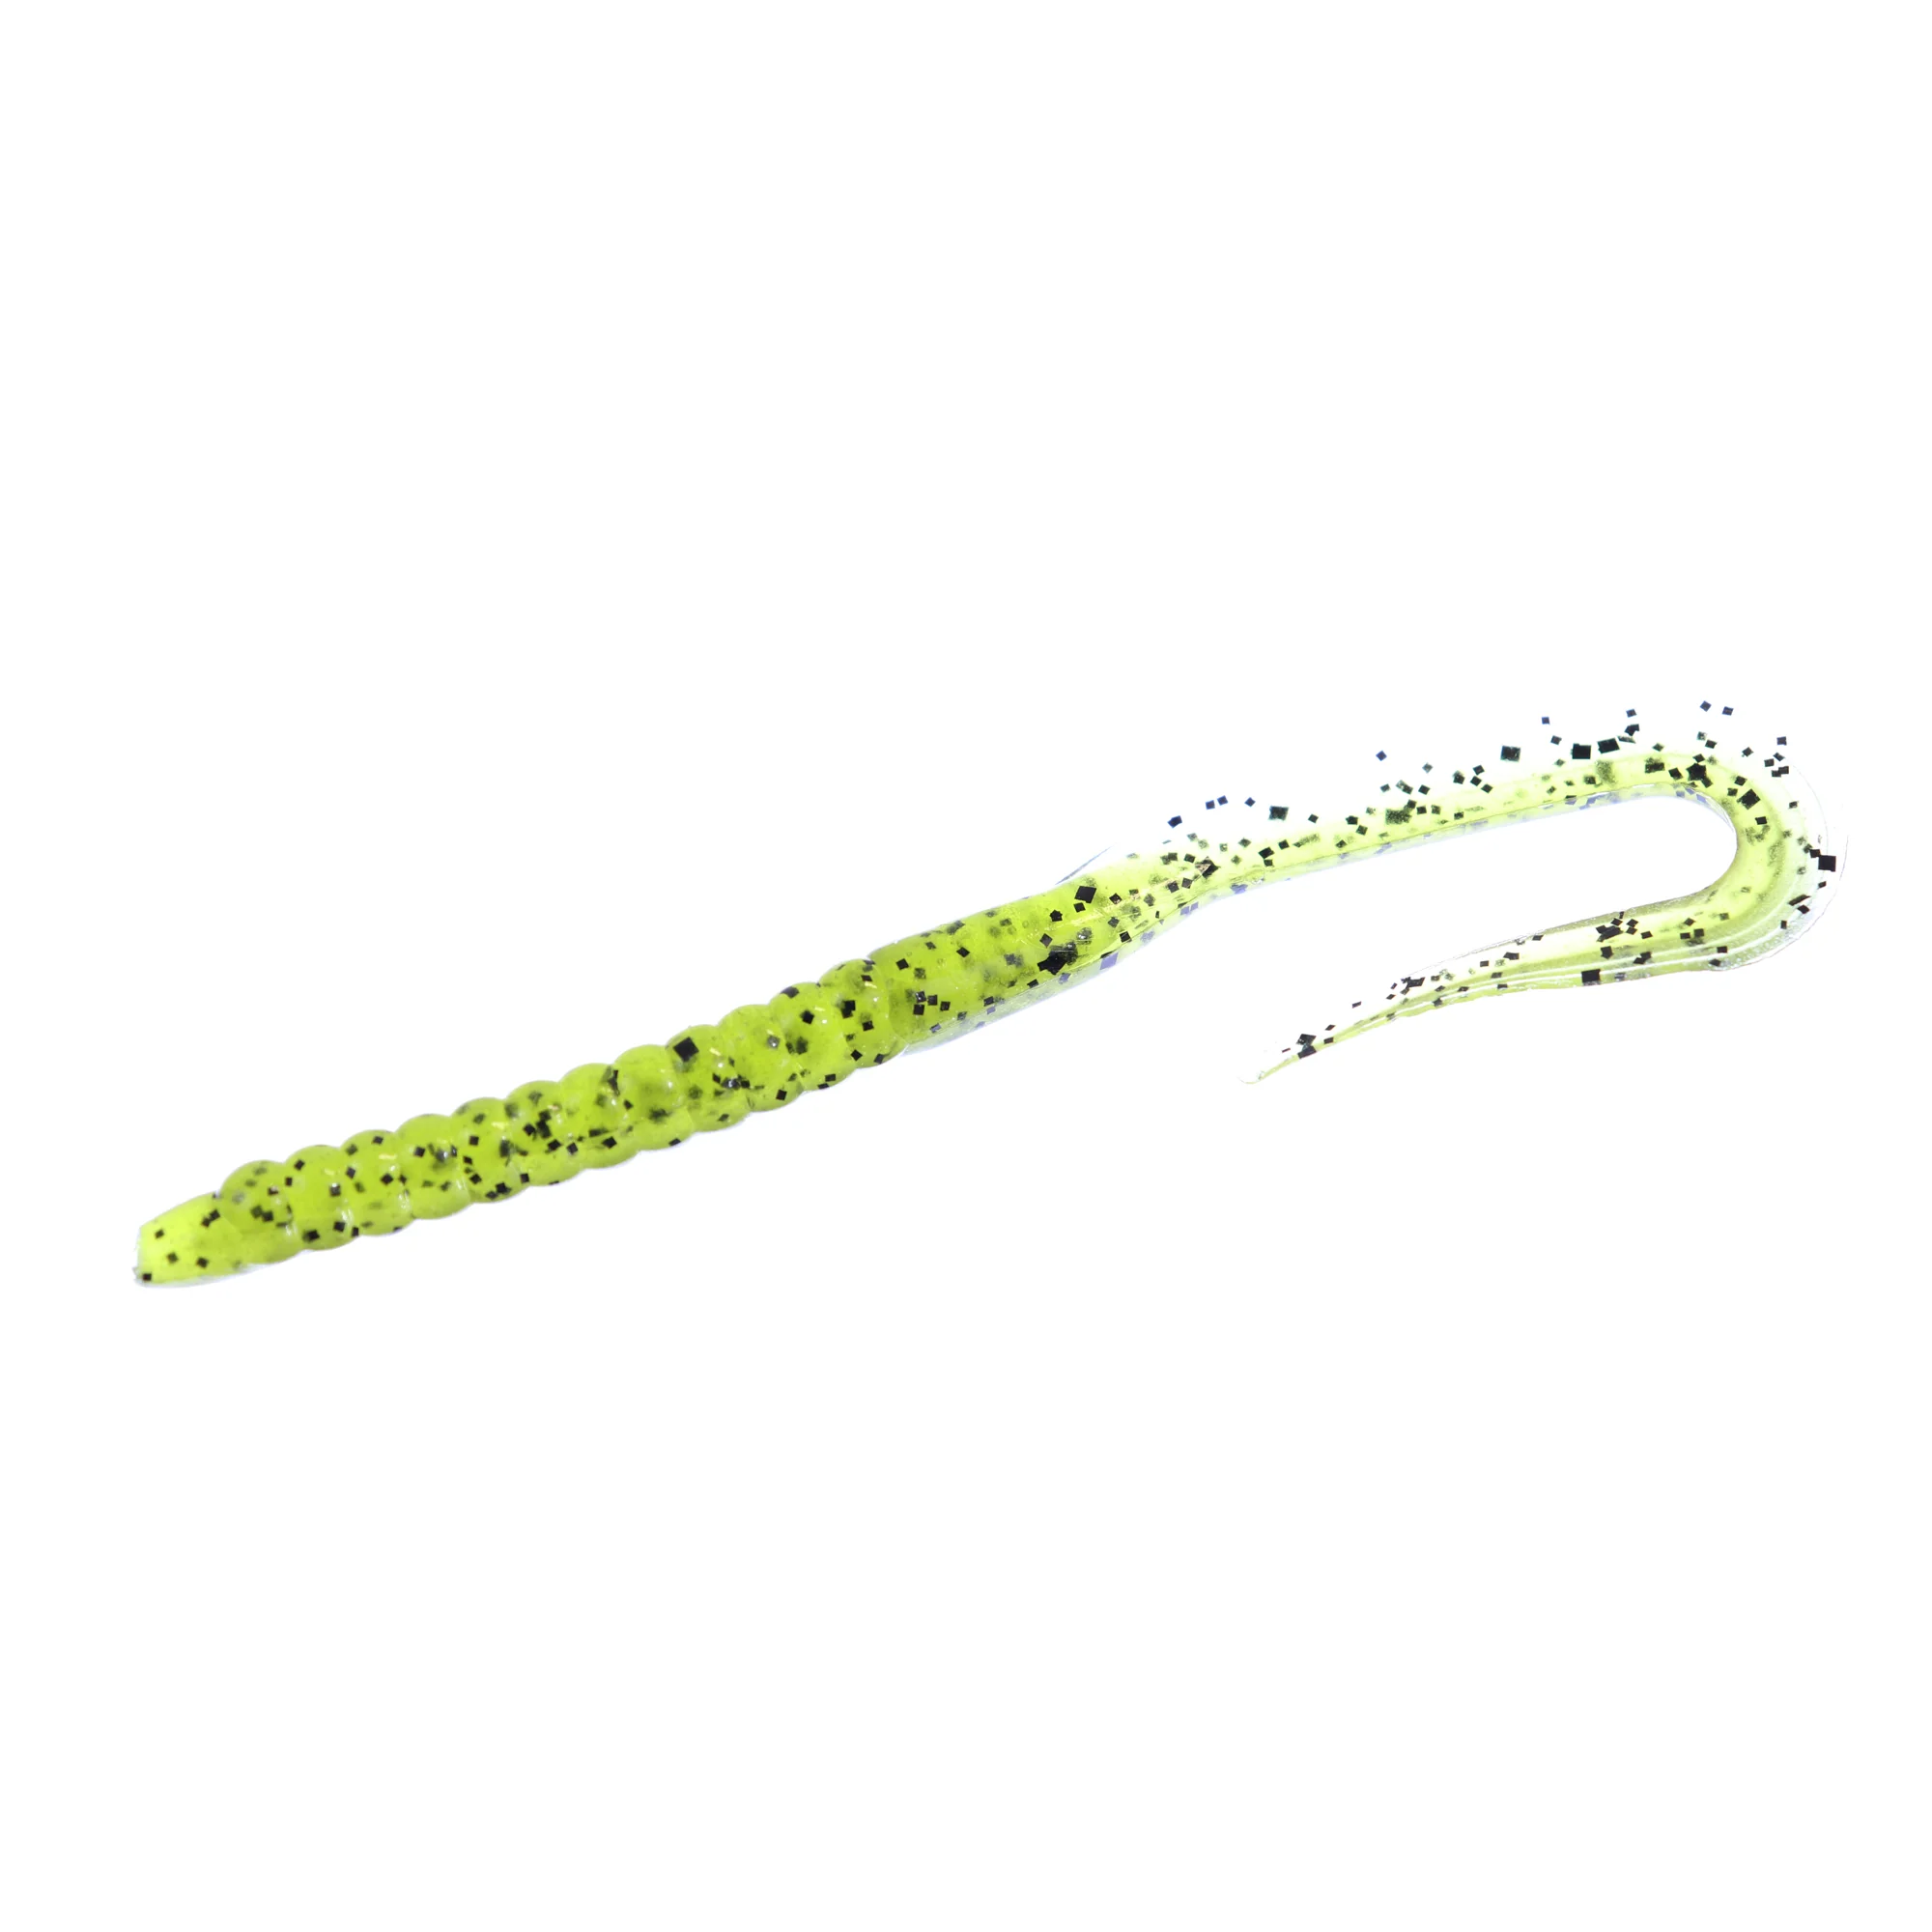 Zoom 144-284 Mag U-tail Worm 7.5in Green Pump Magic Fishing Lure for sale  online